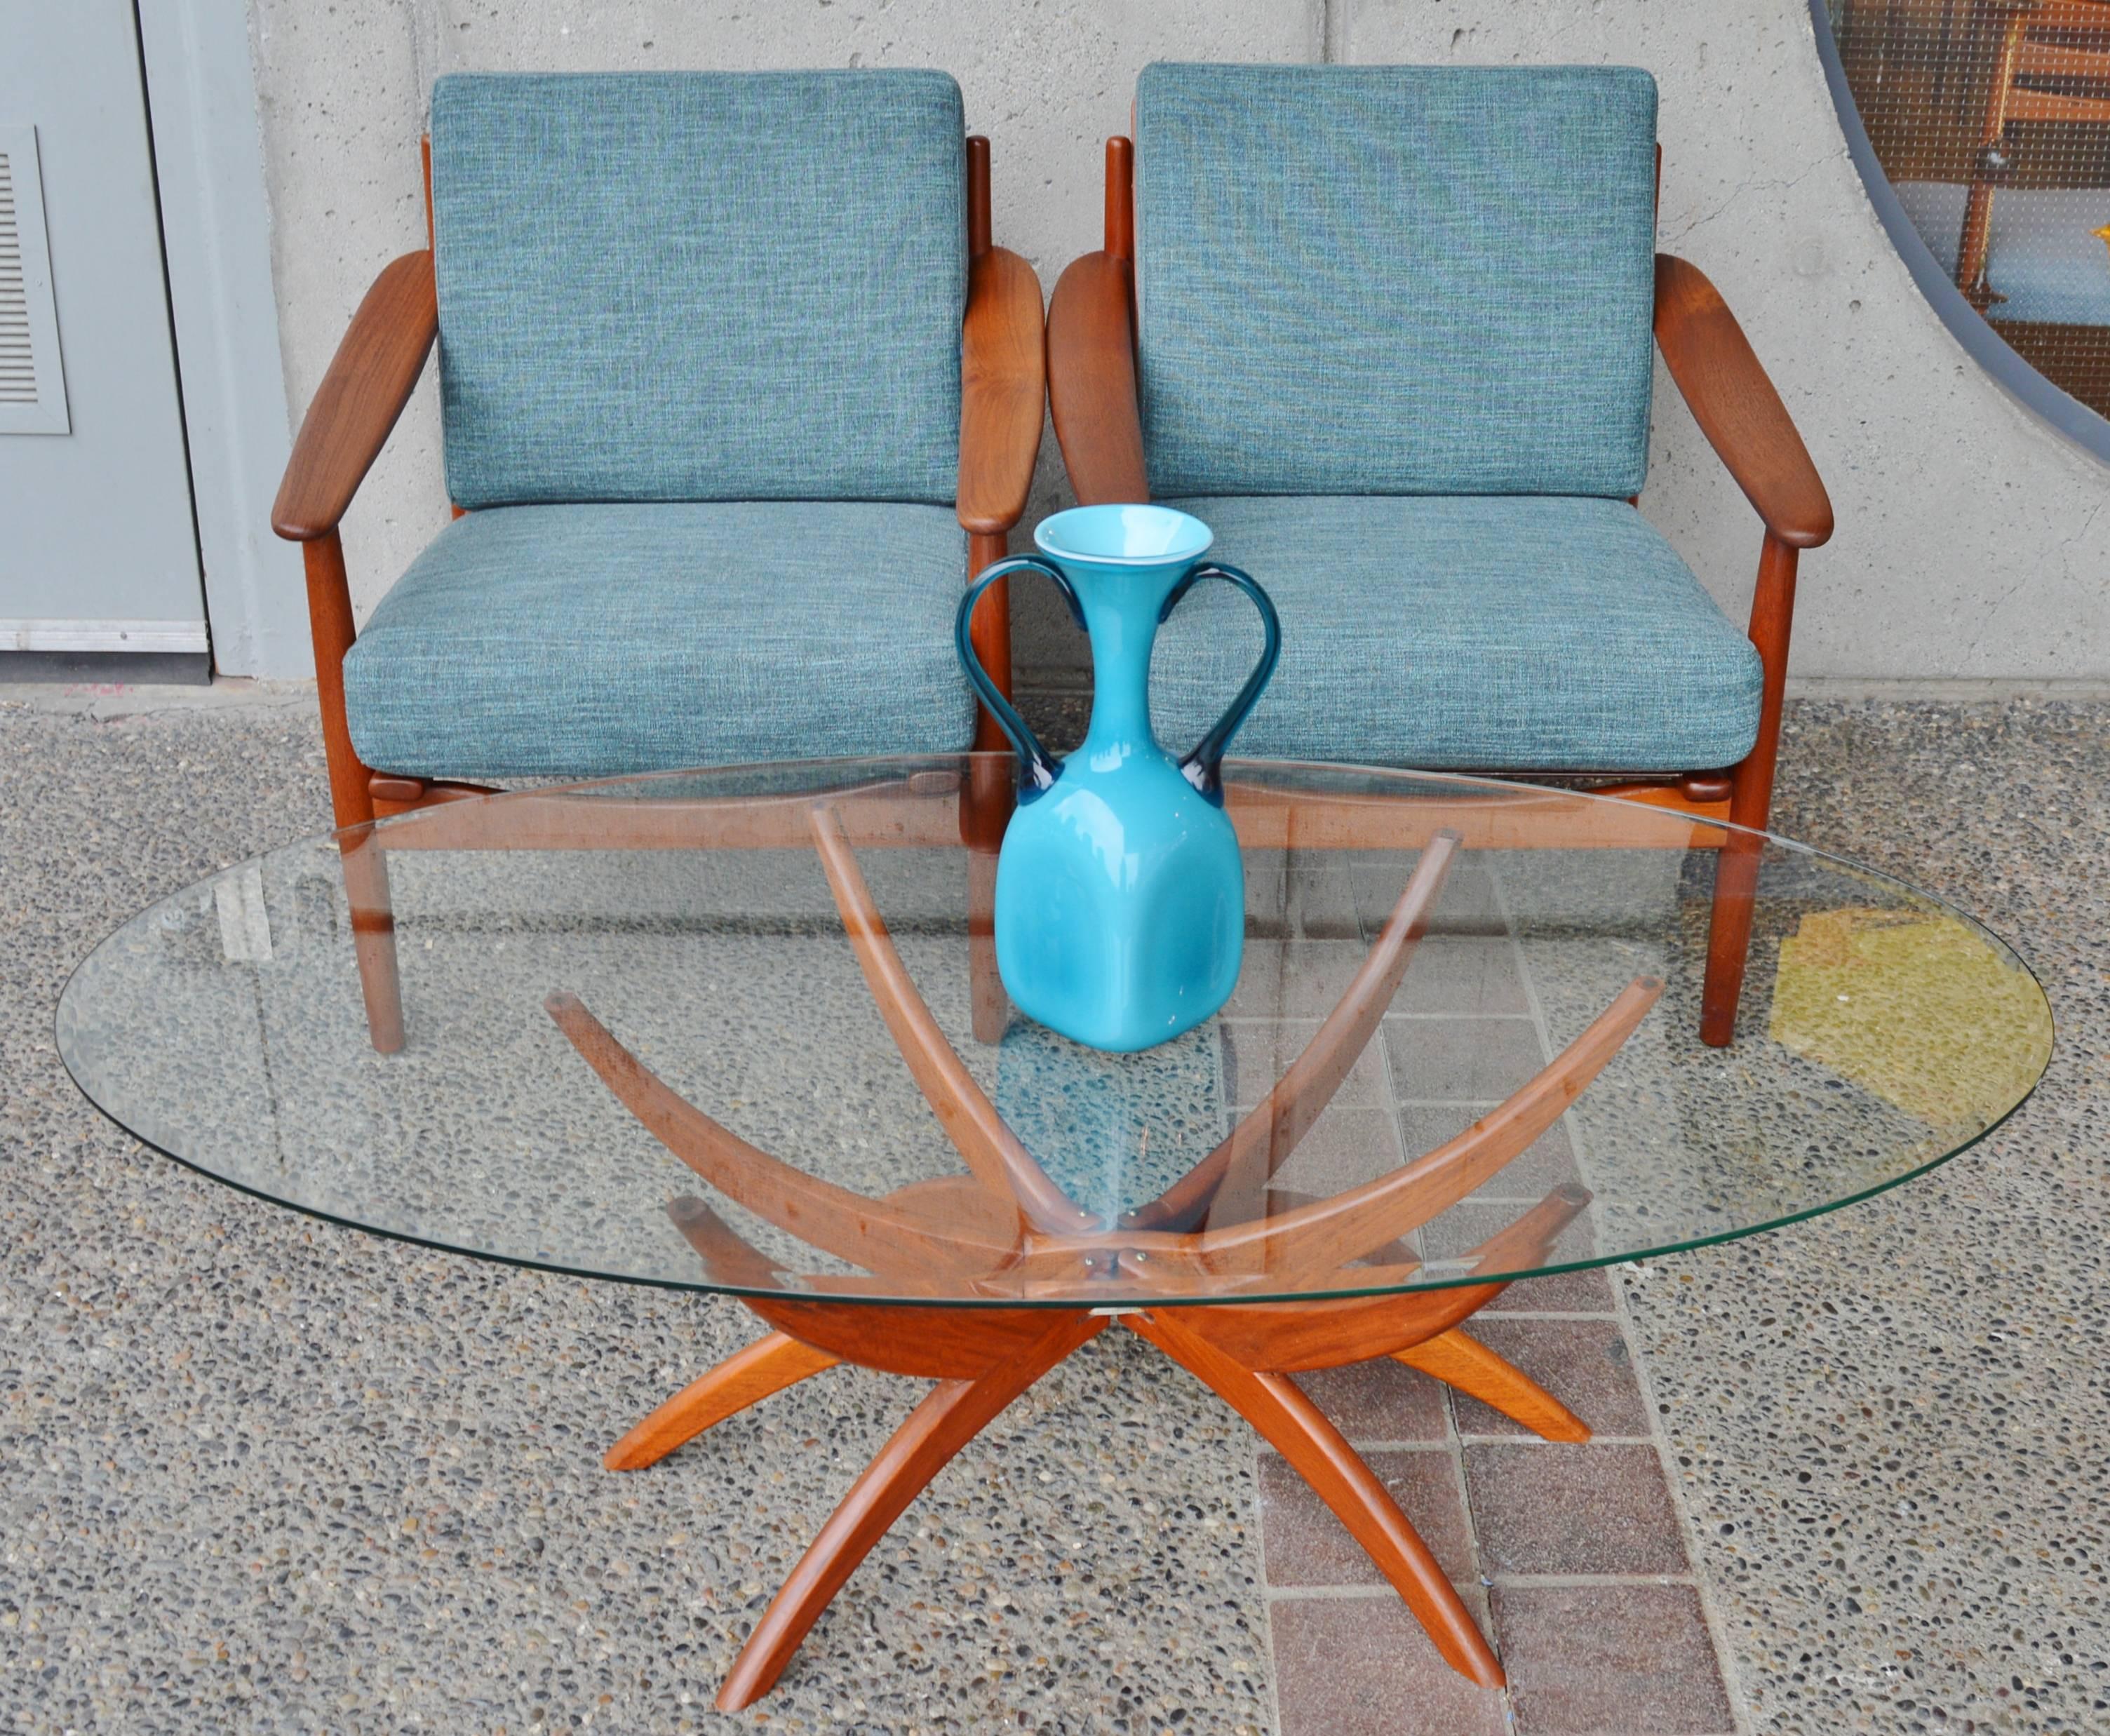 This totally killer Danish modern teak spider leg coffee table is much in the style of those made famous by Vladimir Kagan. Featuring beautifully contoured double curved legs that fold flat for easy transport, with an oval beveled edge glass top.